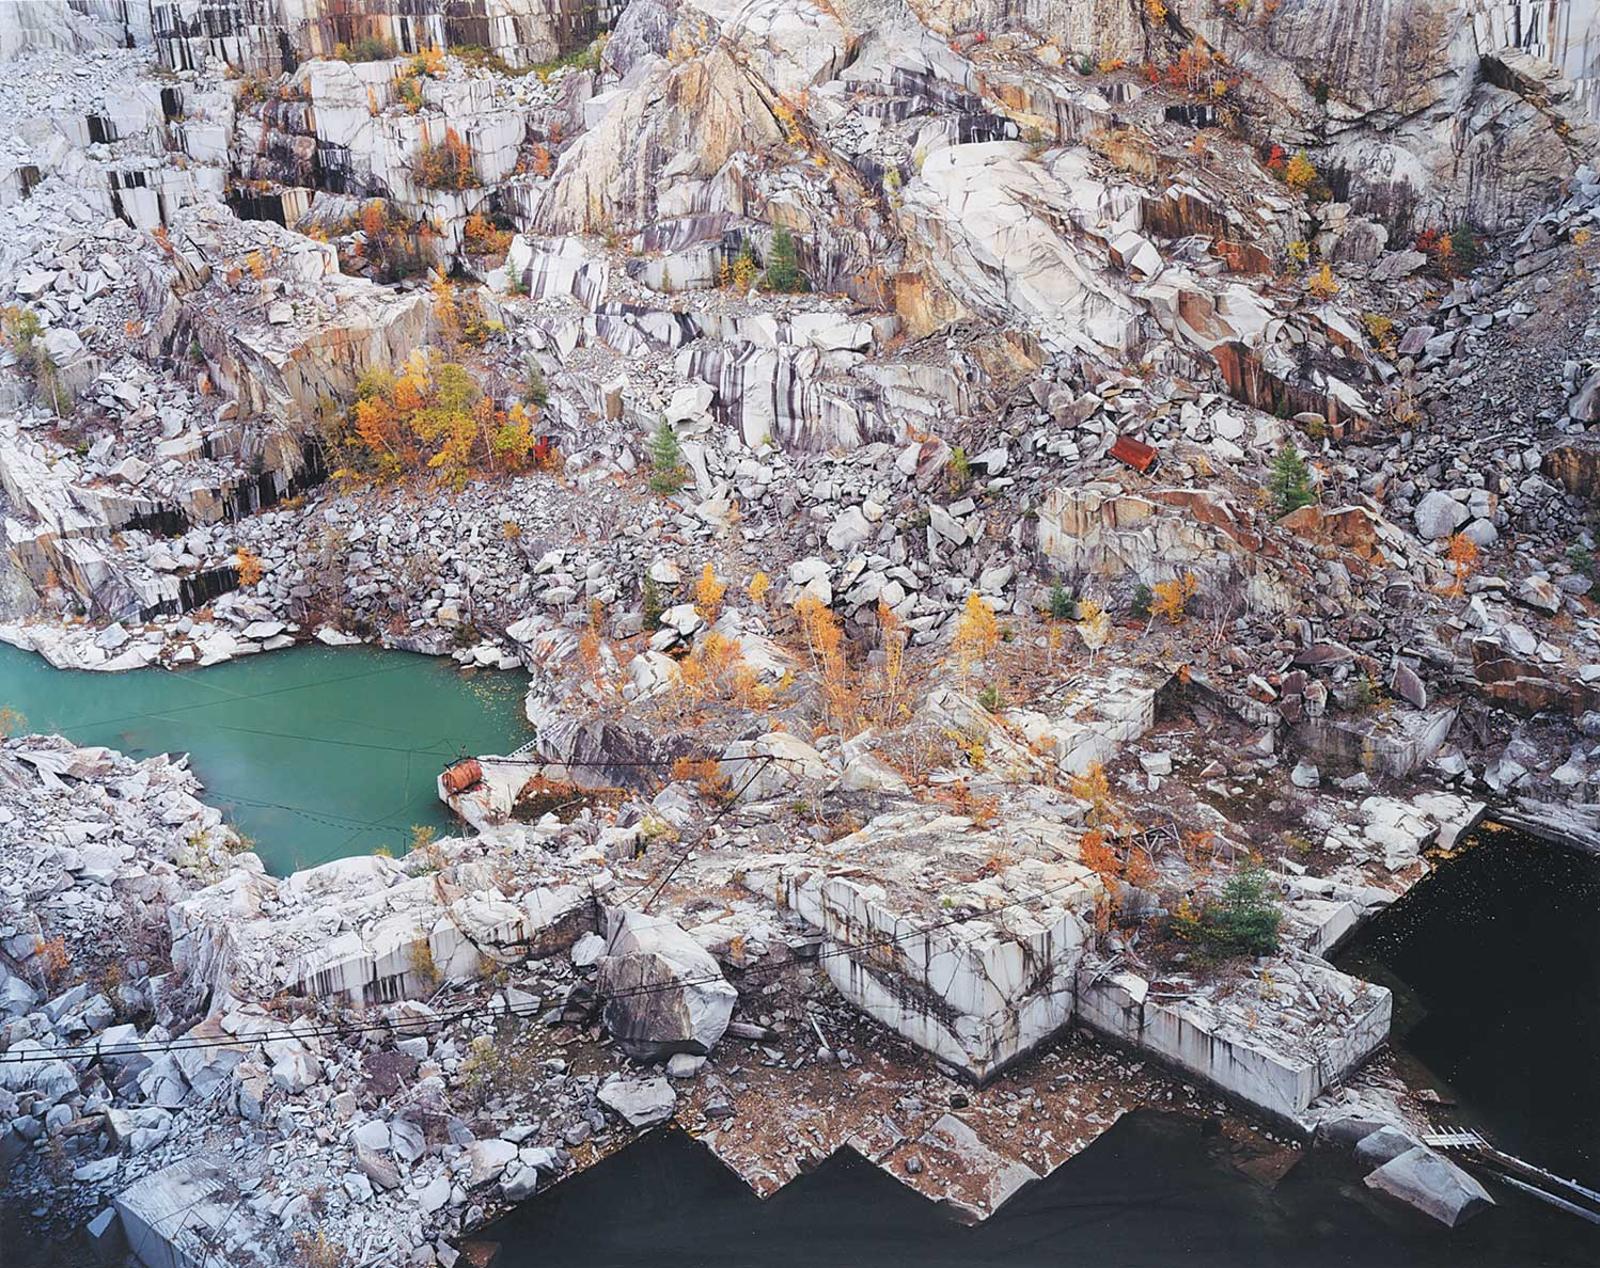 Edward Burtynsky (1955) - Rock of Ages #24, Abandoned Section, Rock of Ages Quarry, Barre, Vermont  #2/10